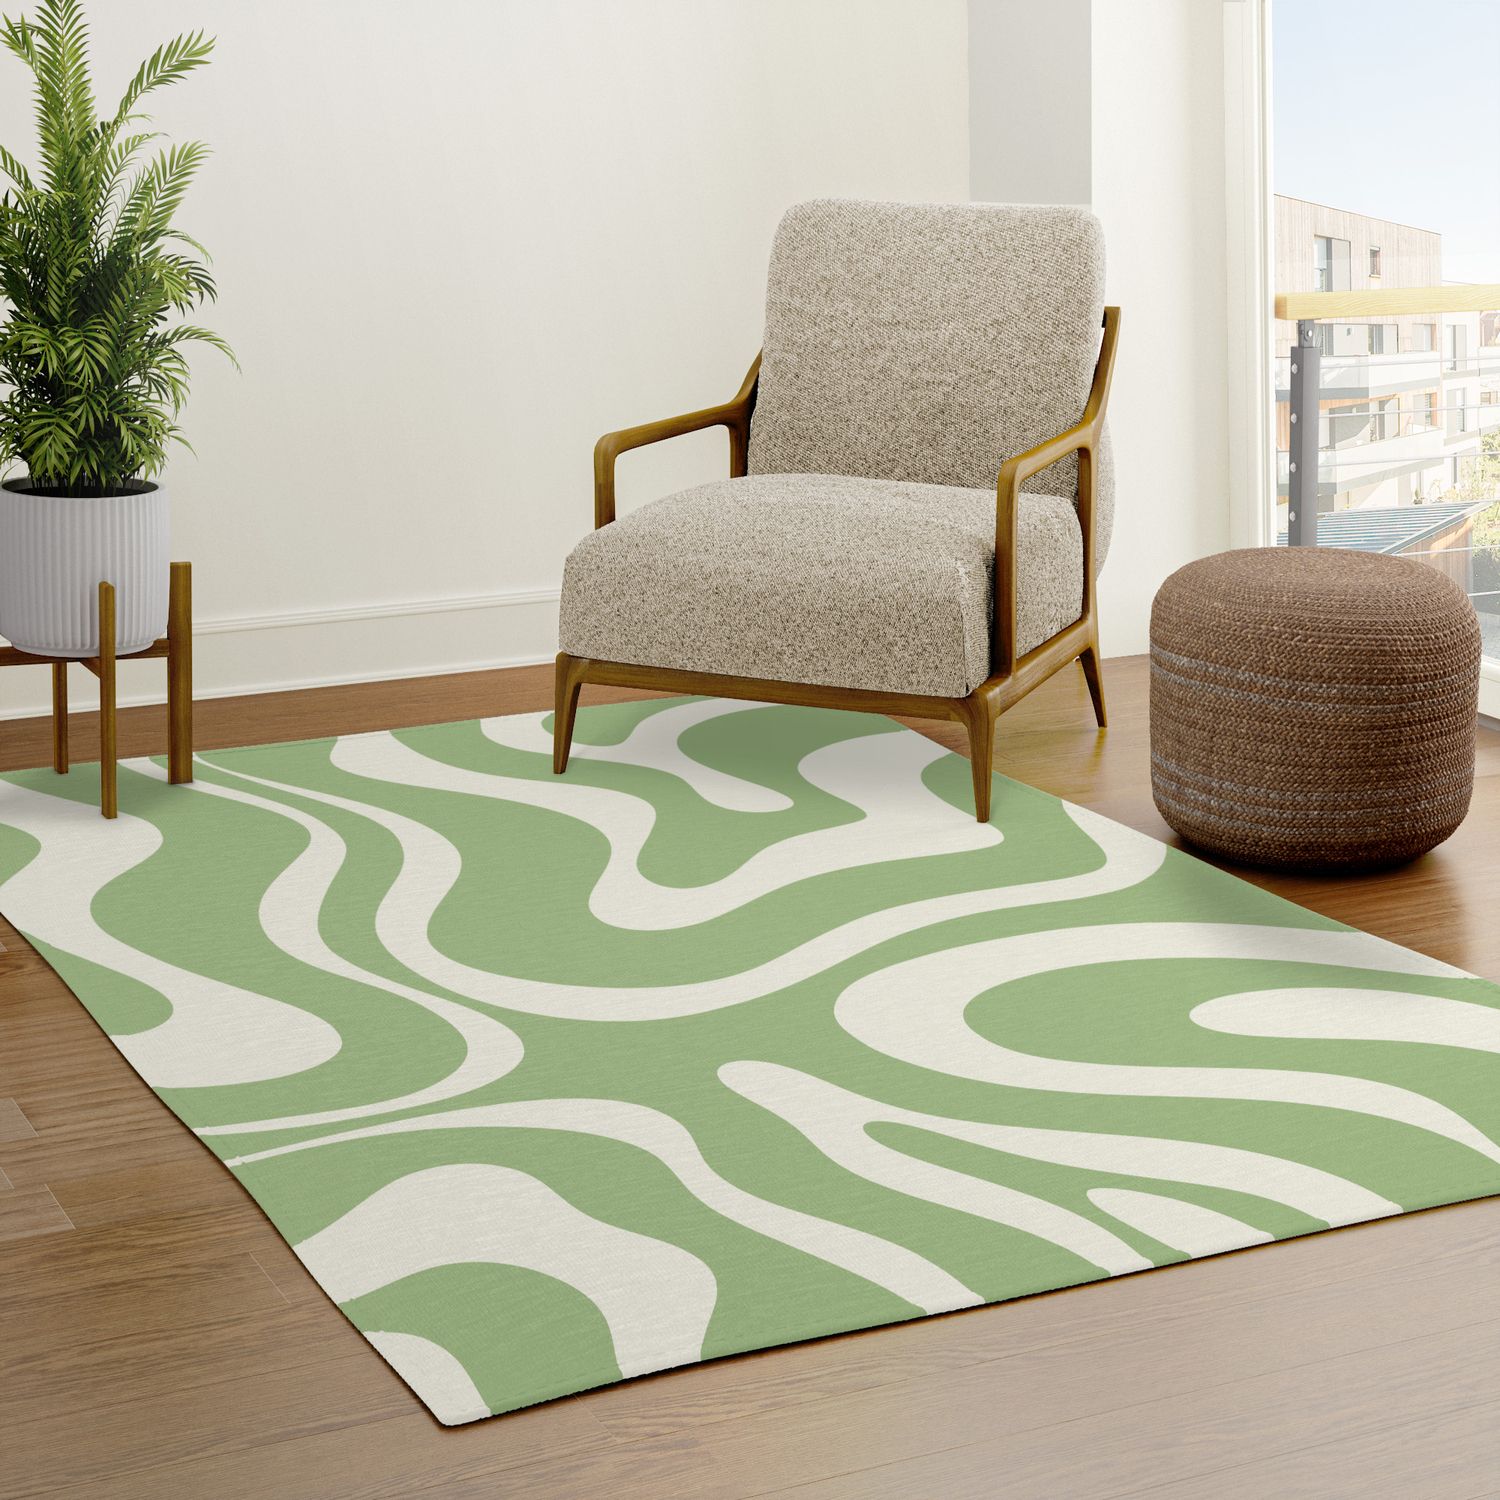 Modern Liquid Swirl Abstract Pattern In Light Sage Green And Cream Rug Kierkegaard Design Studio | Society6 Intended For Green Rugs (View 6 of 15)